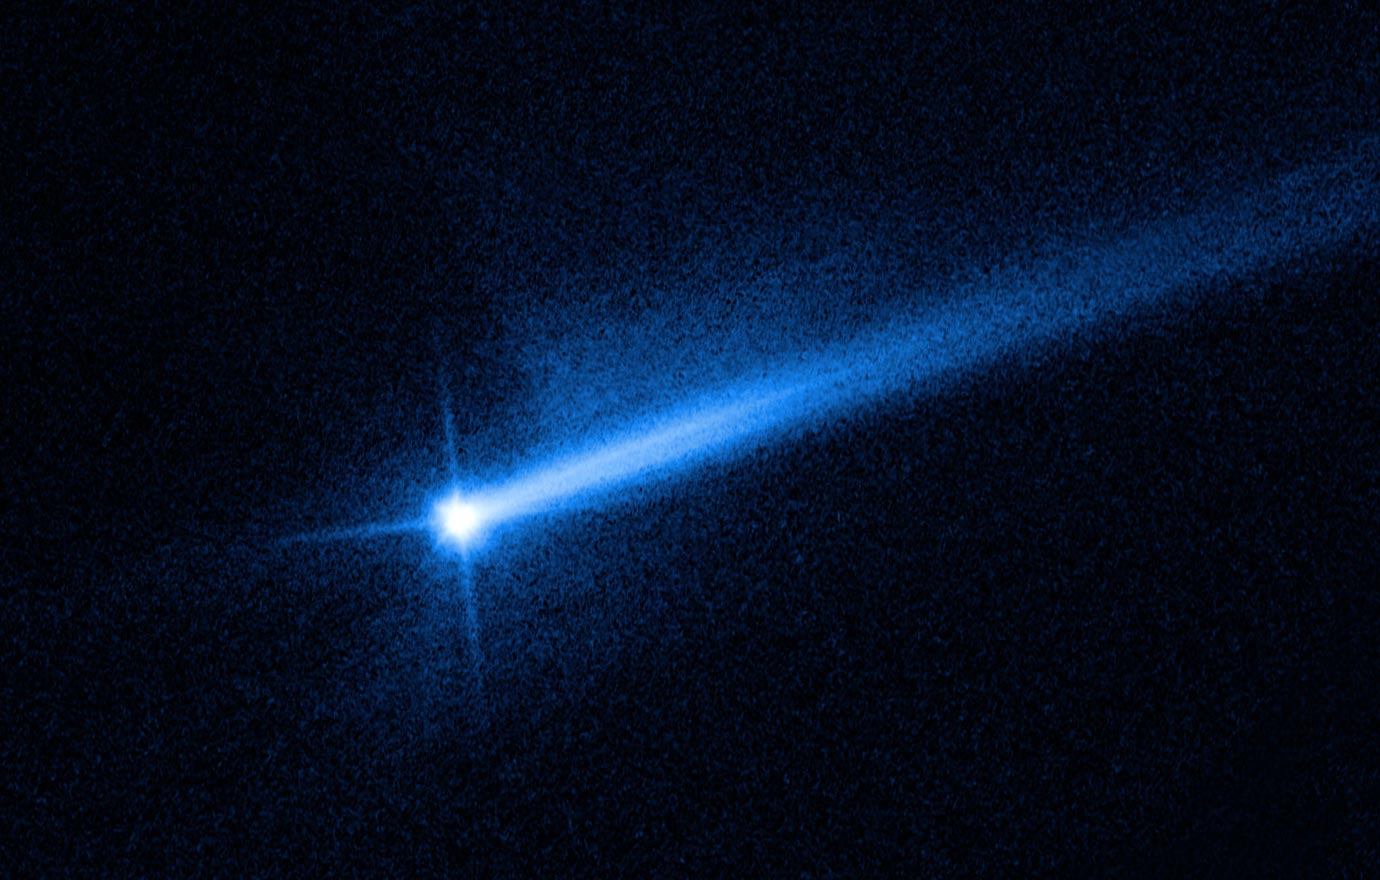 Hubble Sees Twin Tails After DART Impact